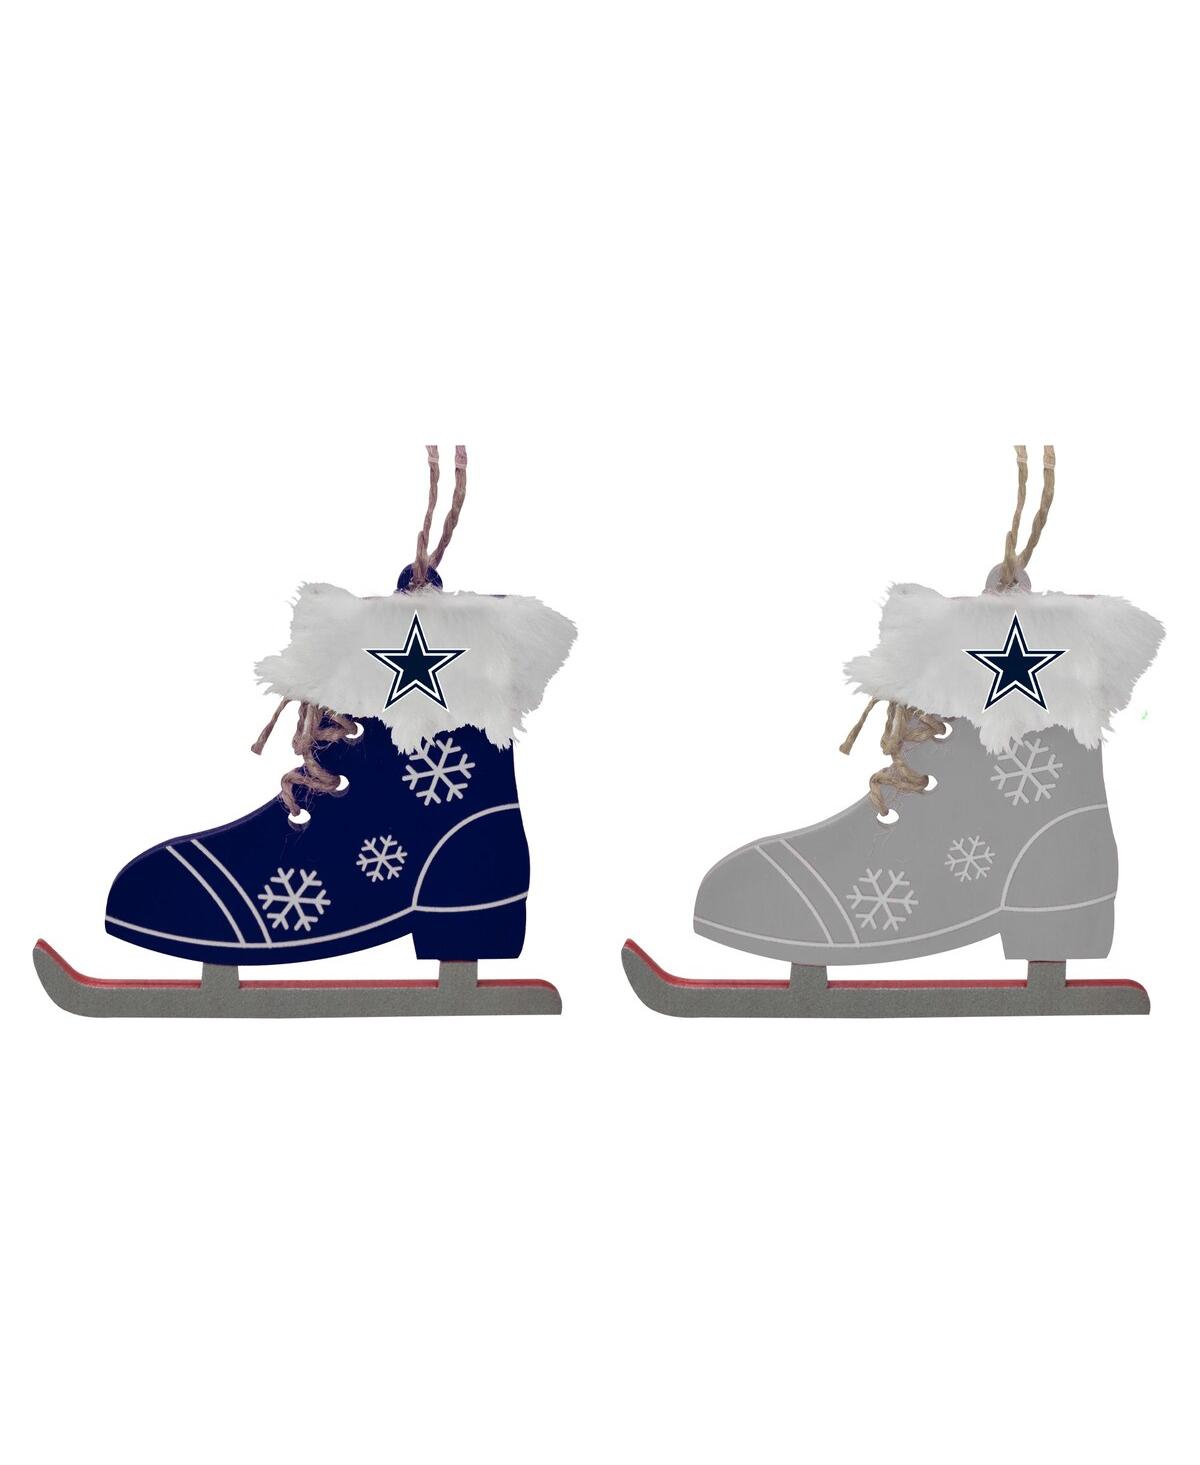 Memory Company The  Dallas Cowboys Two-pack Ice Skate Ornament Set In Blue,gray